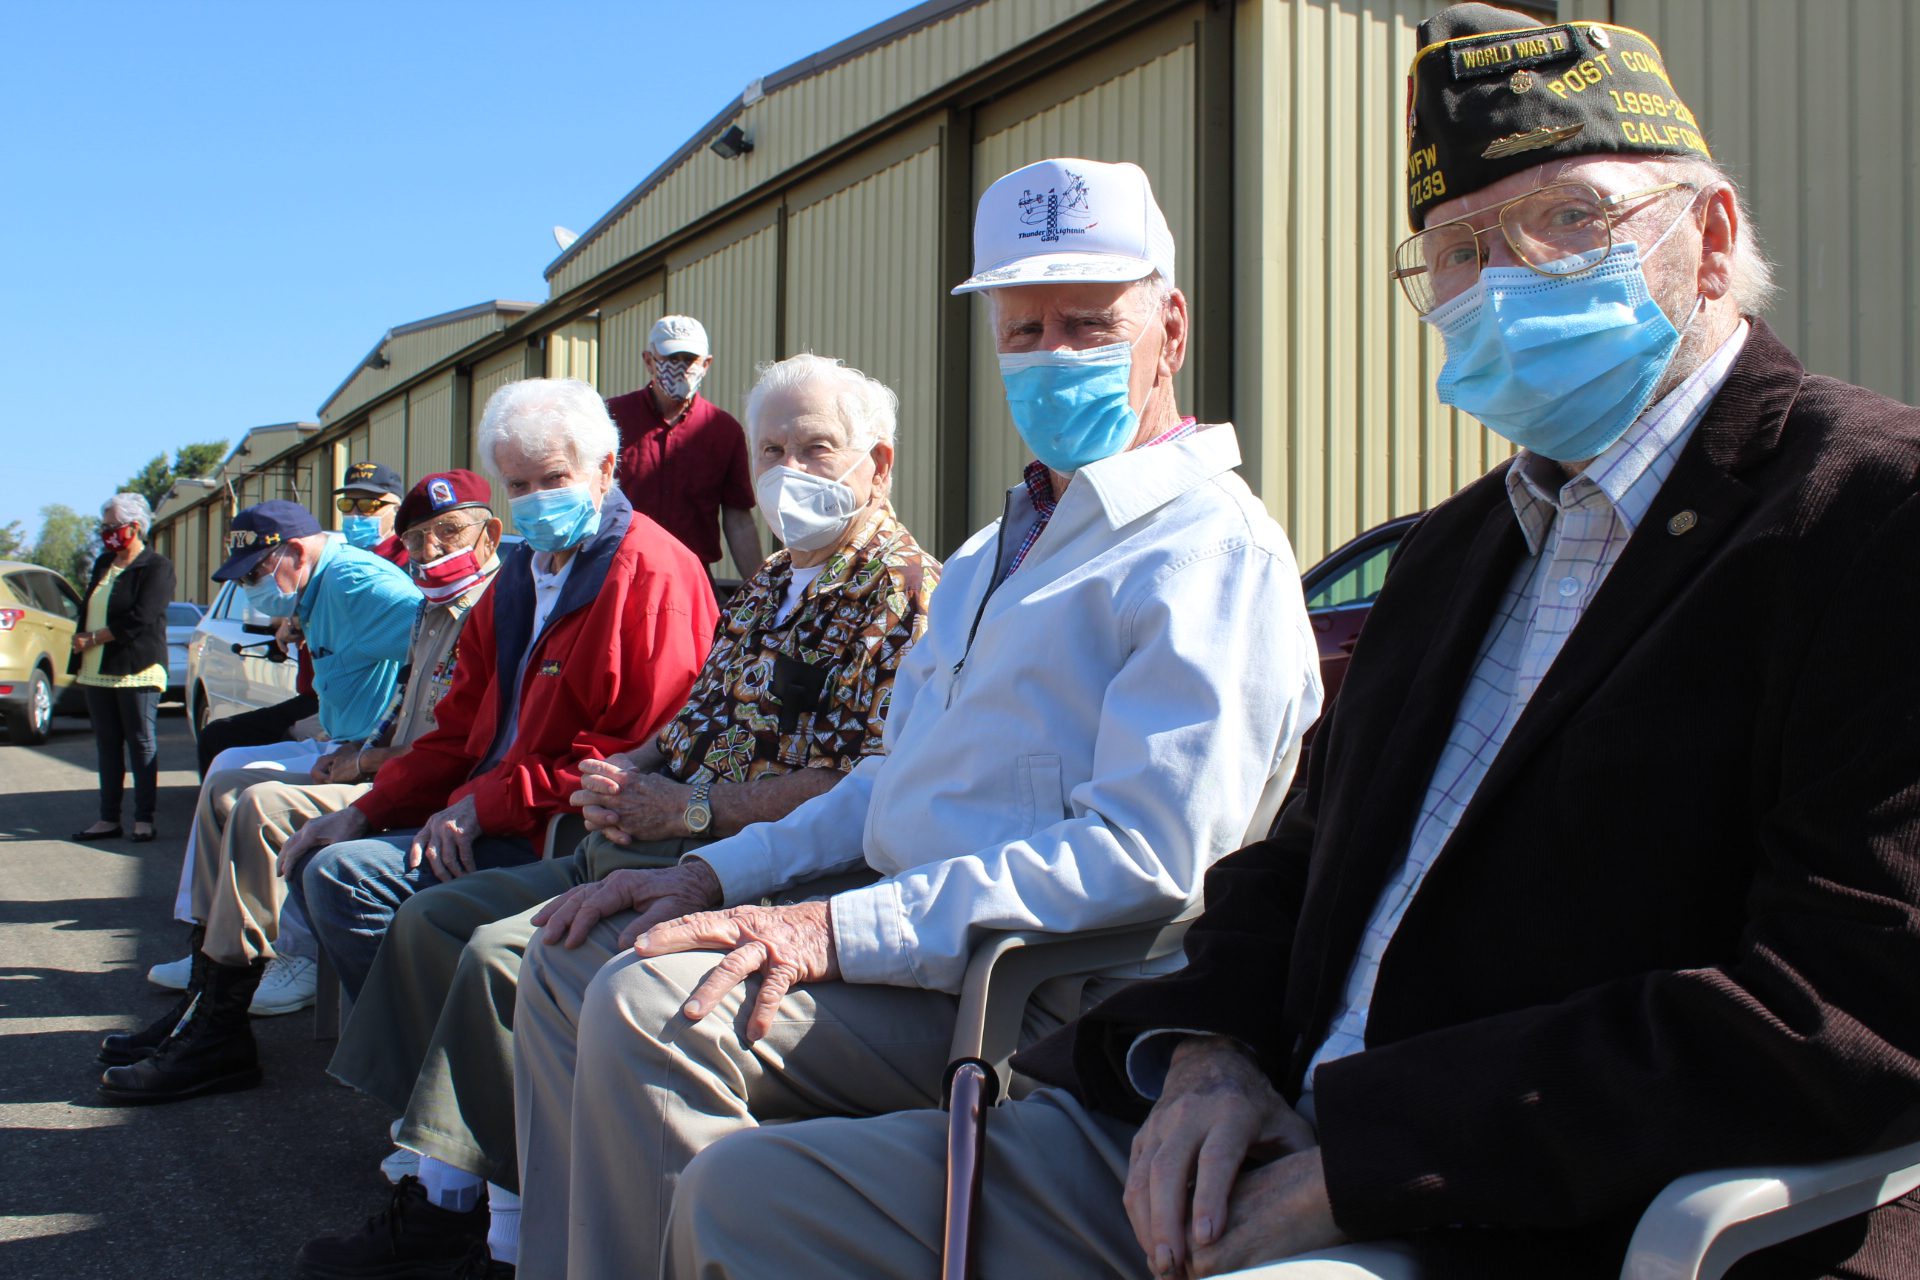 Local DAR chapter honors WWII veterans and the 75th anniversary of the war’s end